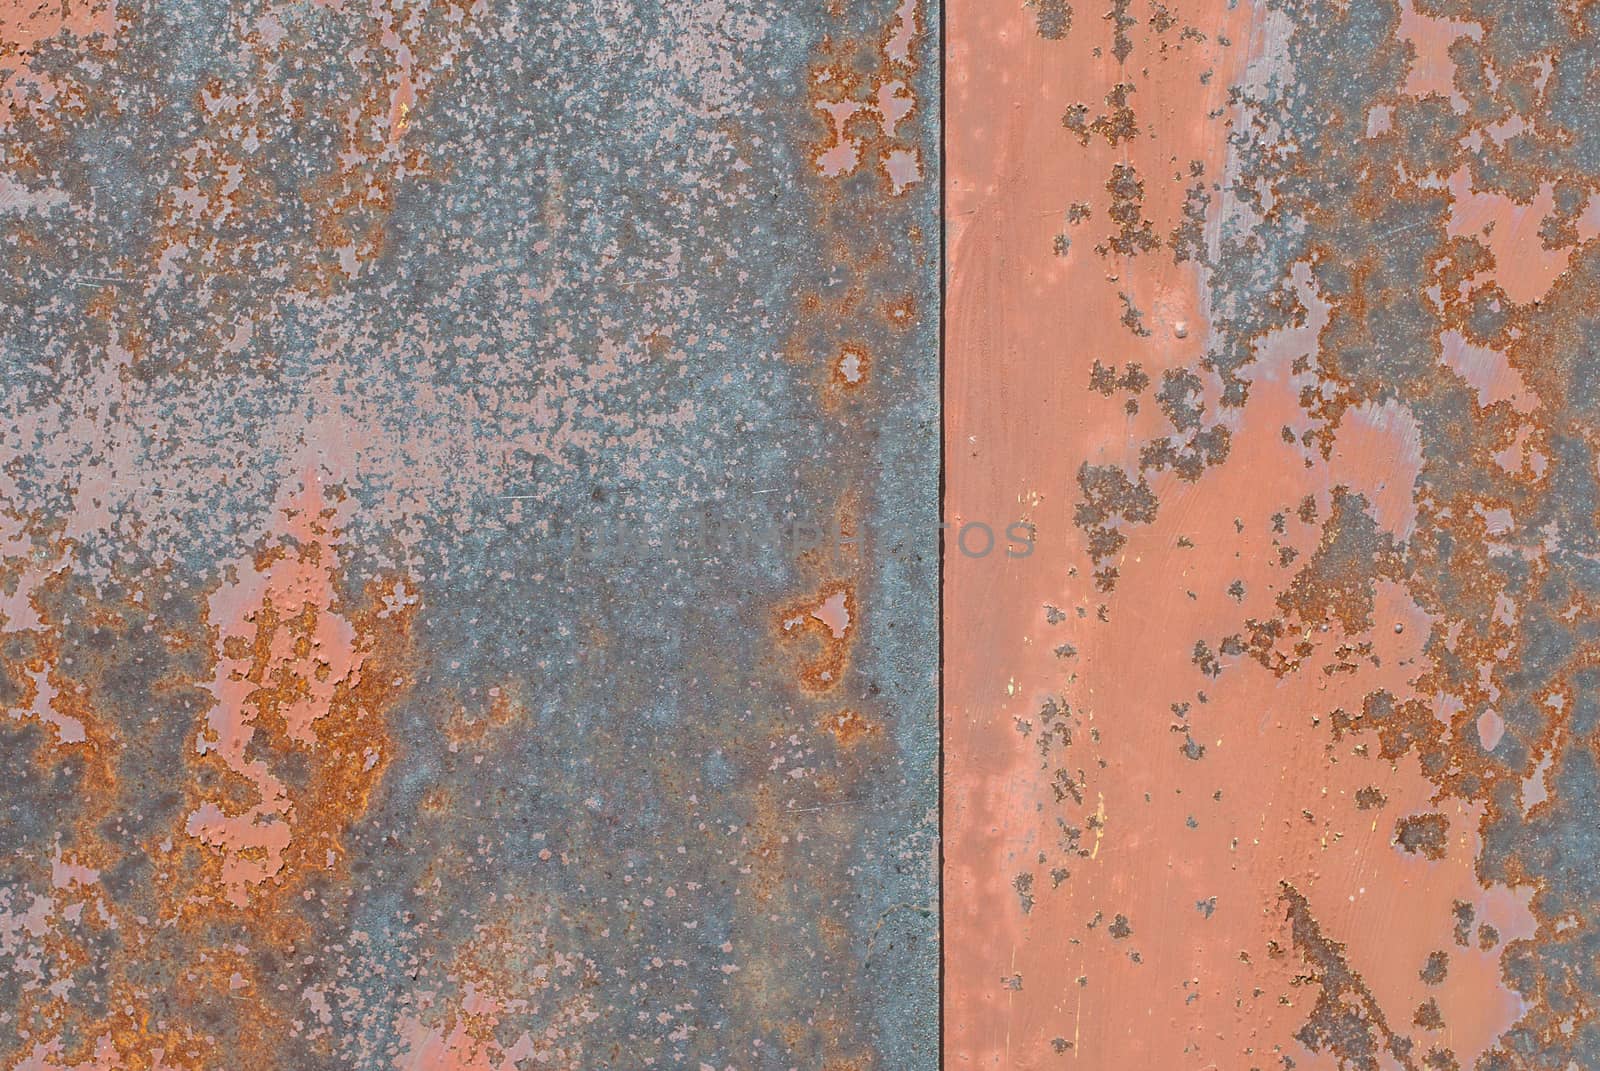 chipped paint on iron surface, grunge metal surface, great background or texture for your project by uvisni